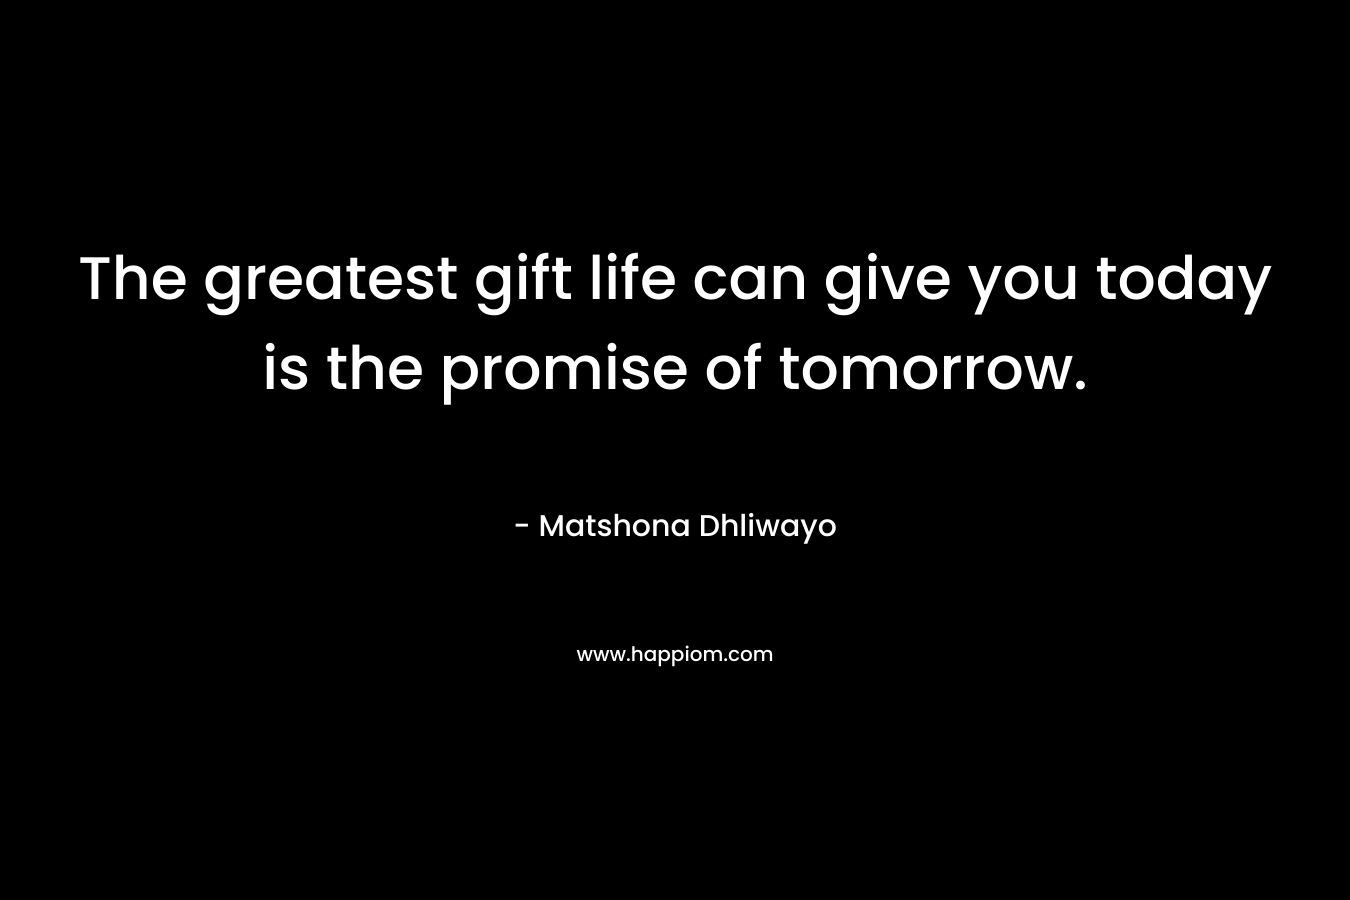 The greatest gift life can give you today is the promise of tomorrow.